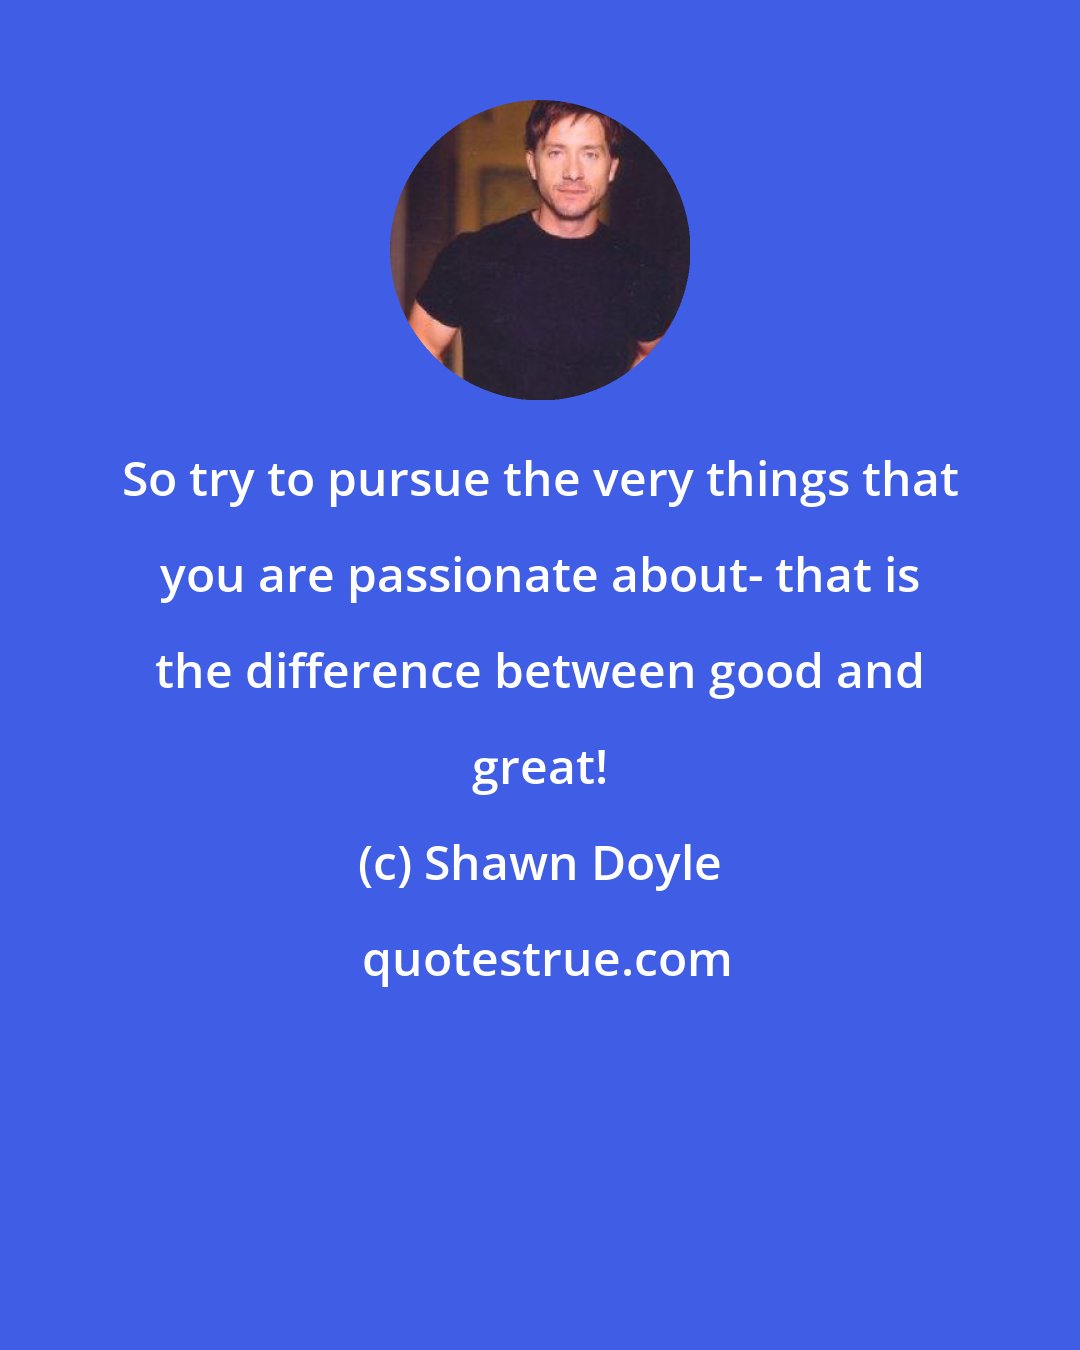 Shawn Doyle: So try to pursue the very things that you are passionate about- that is the difference between good and great!